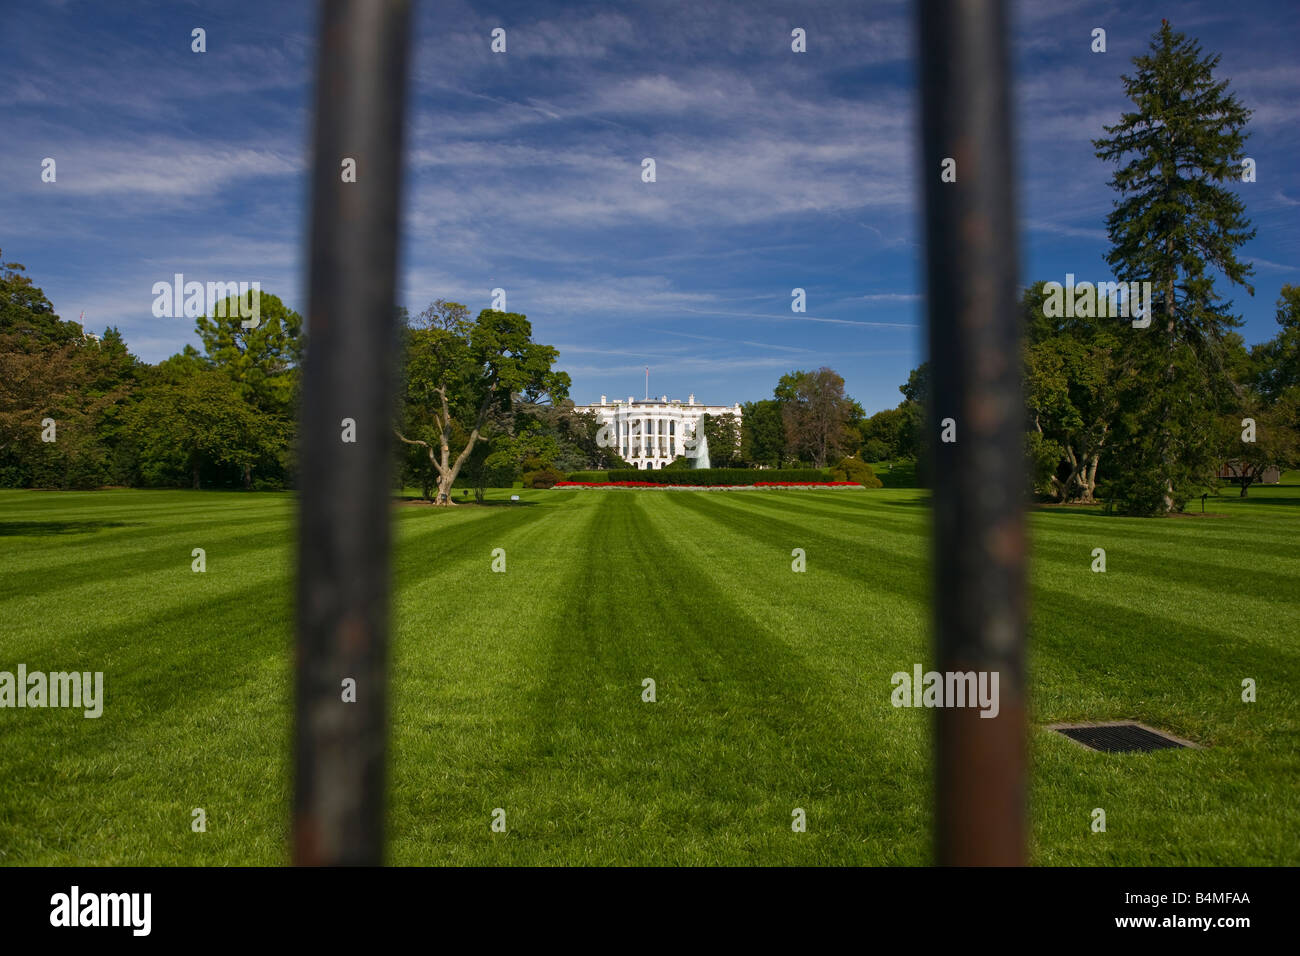 WASHINGTON, DC USA - The White House, and the south lawn, seen through bars of fence. Stock Photo